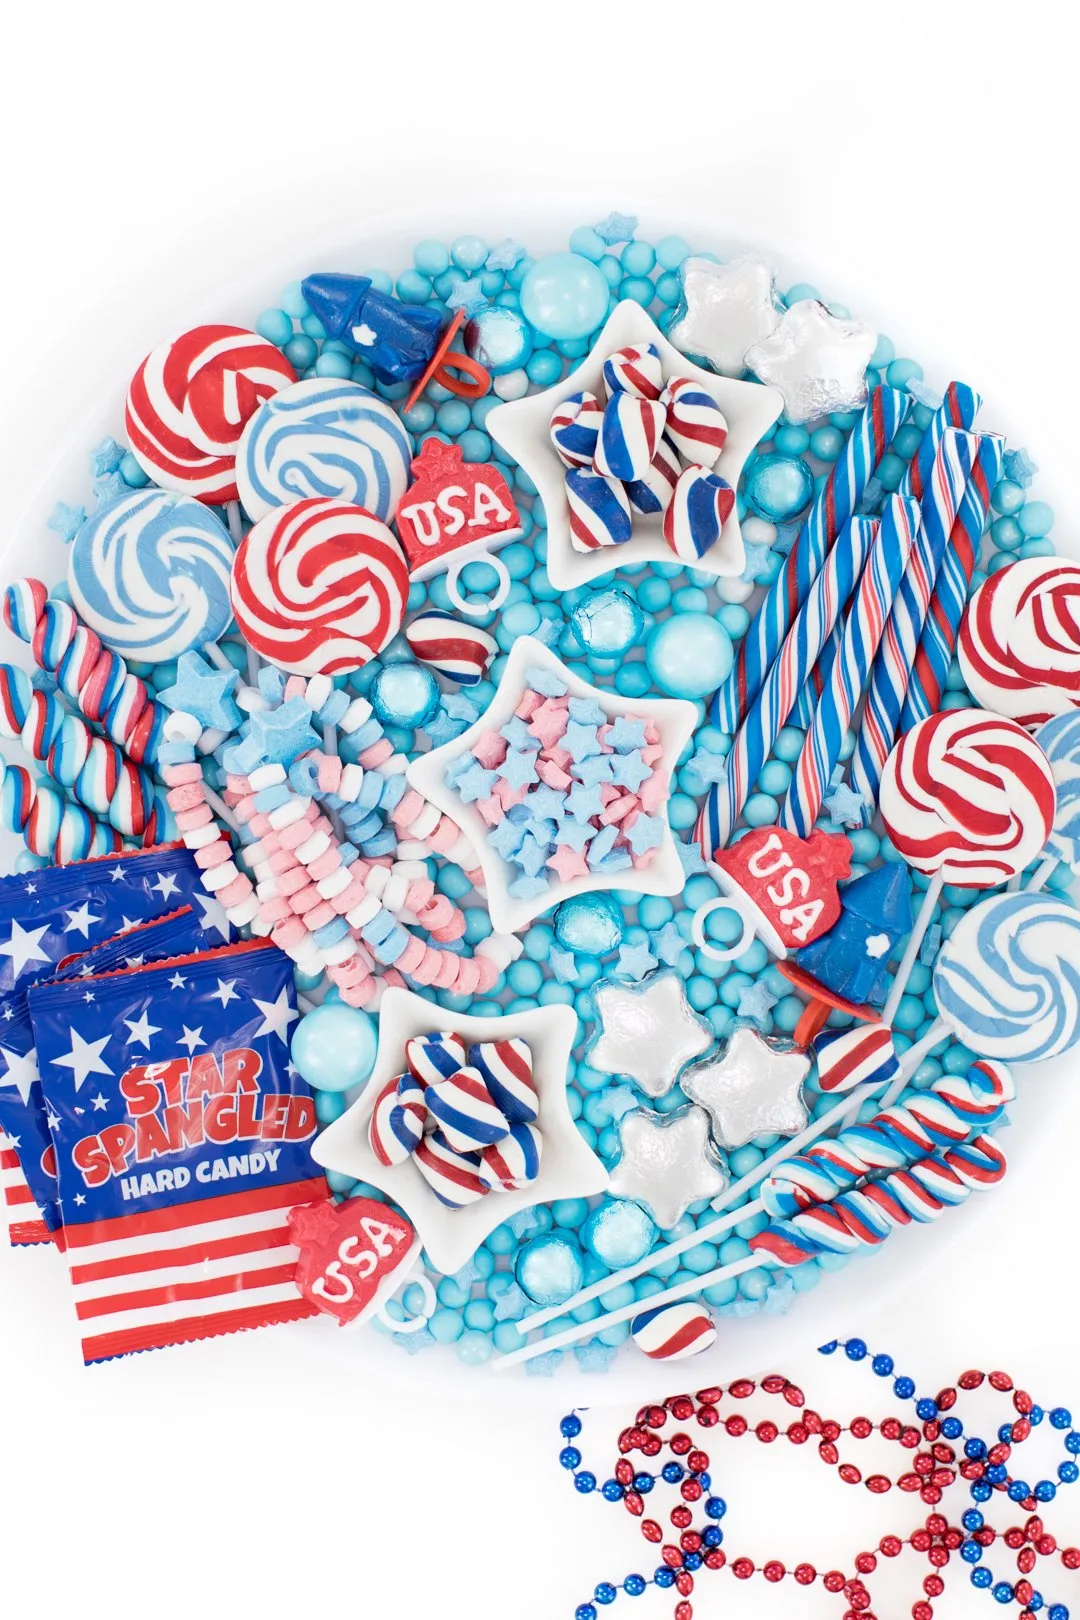 Pretty spread of patriotic candies on a tray. Perfect for parties.